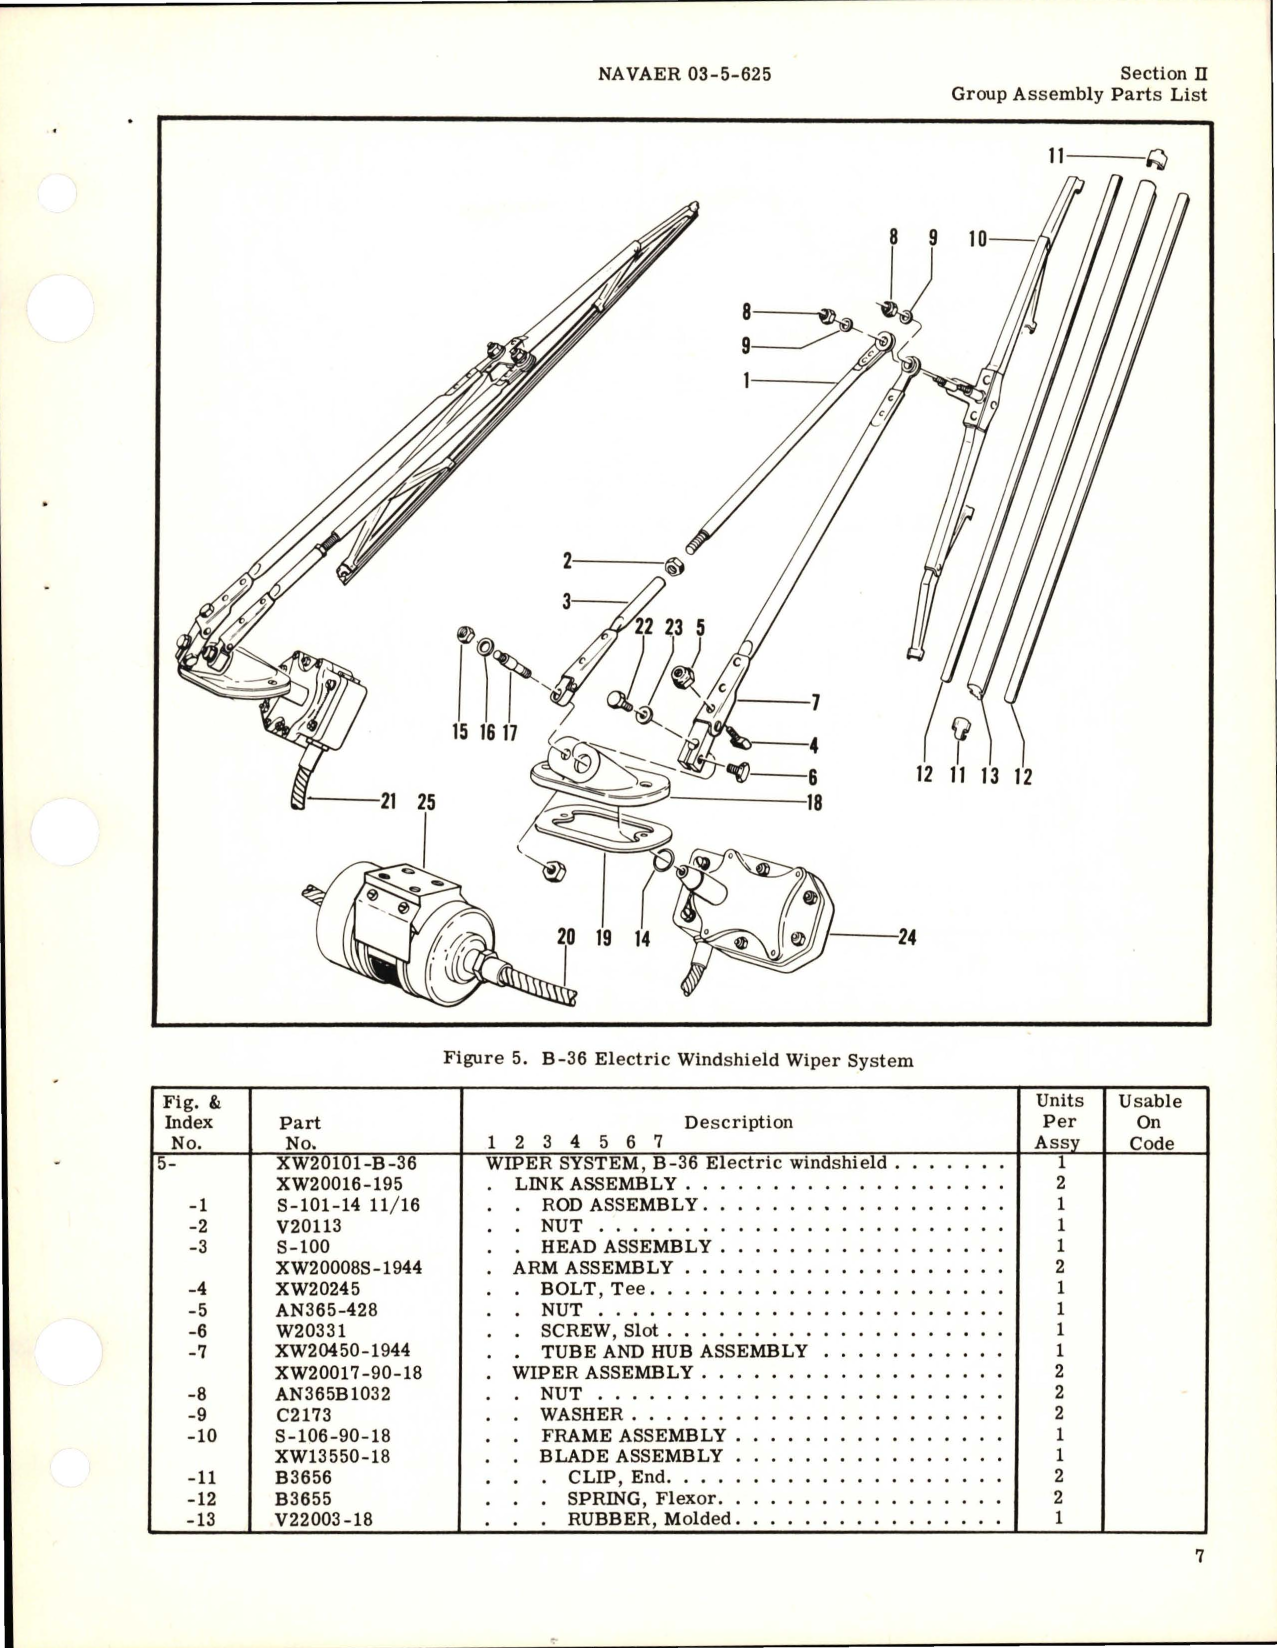 Sample page 9 from AirCorps Library document: Illustrated Parts Breakdown for Electric Windshield Wiper System 